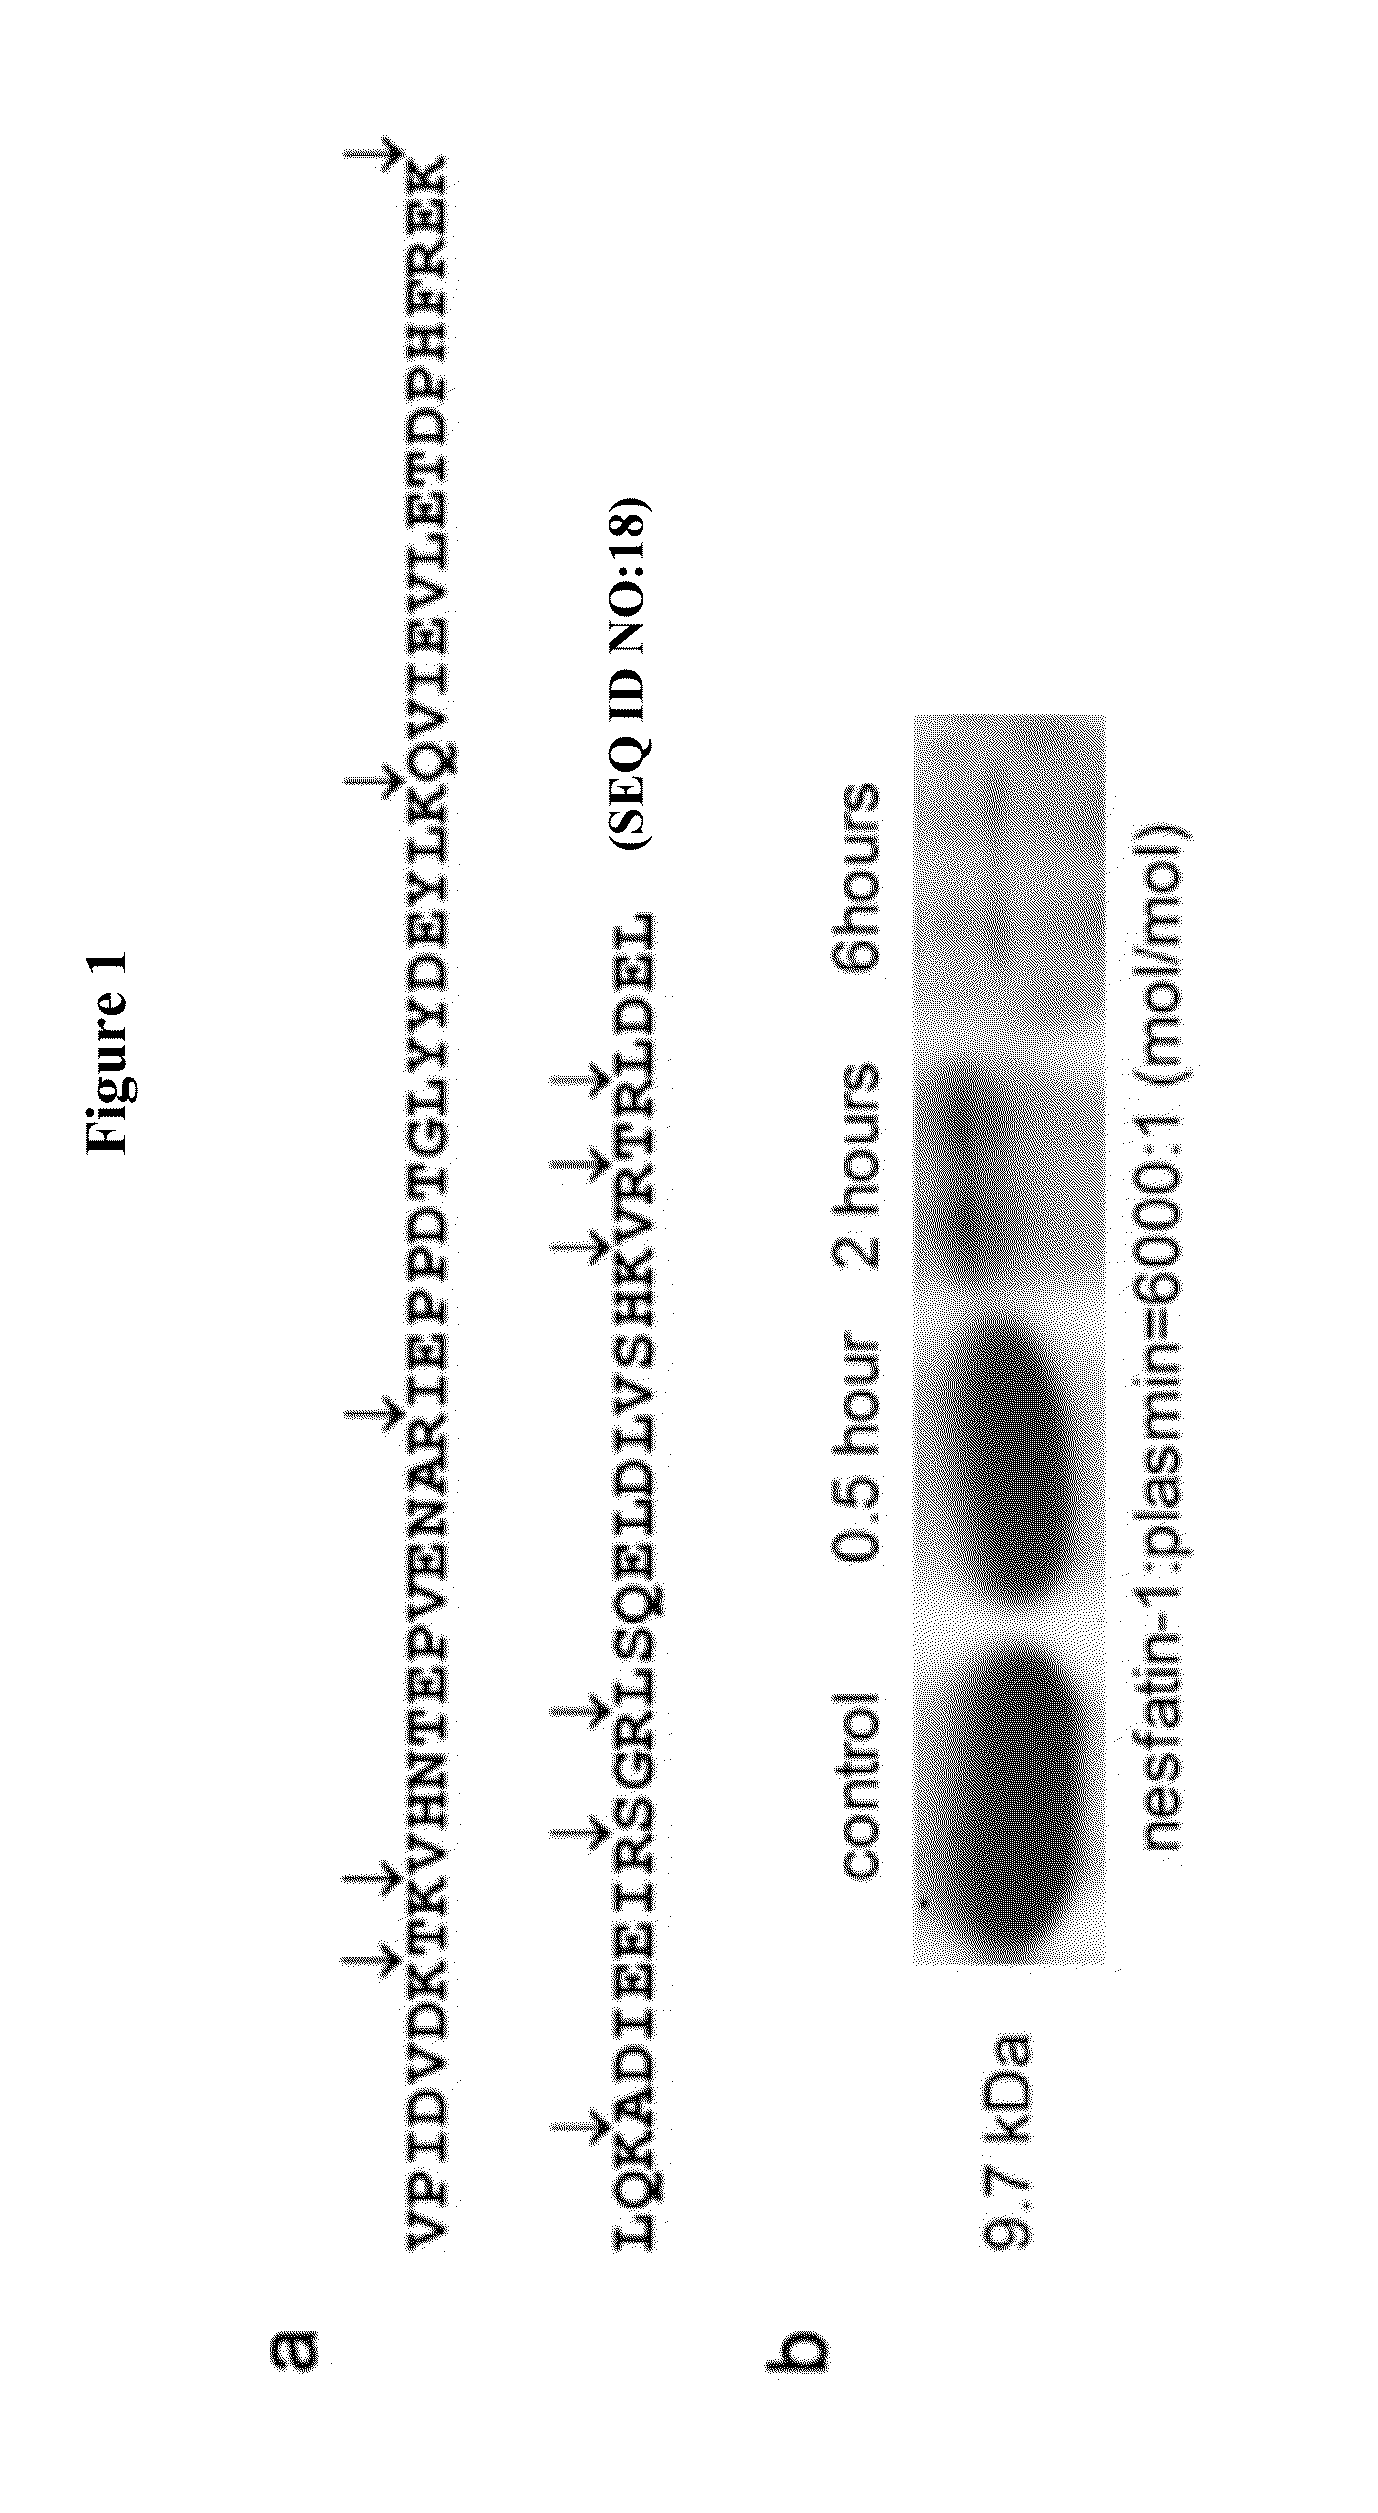 Plasma Anti-diabetic NUCB2 peptide (pladin) and uses thereof